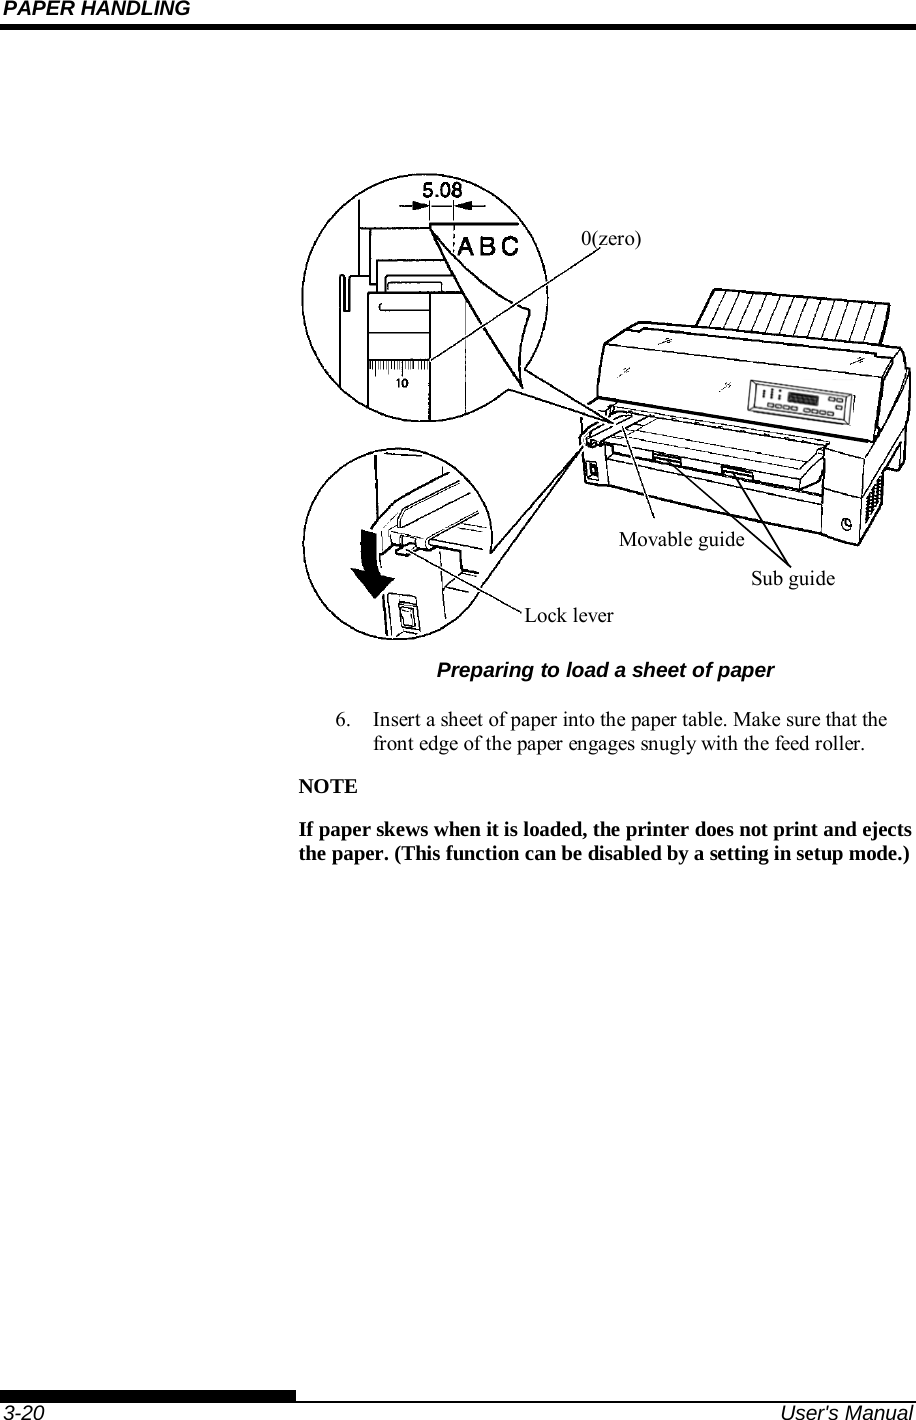 PAPER HANDLING    3-20  User&apos;s Manual    Preparing to load a sheet of paper  6.  Insert a sheet of paper into the paper table. Make sure that the front edge of the paper engages snugly with the feed roller. NOTE If paper skews when it is loaded, the printer does not print and ejects the paper. (This function can be disabled by a setting in setup mode.)            0(zero) Movable guide Lock lever Sub guide 